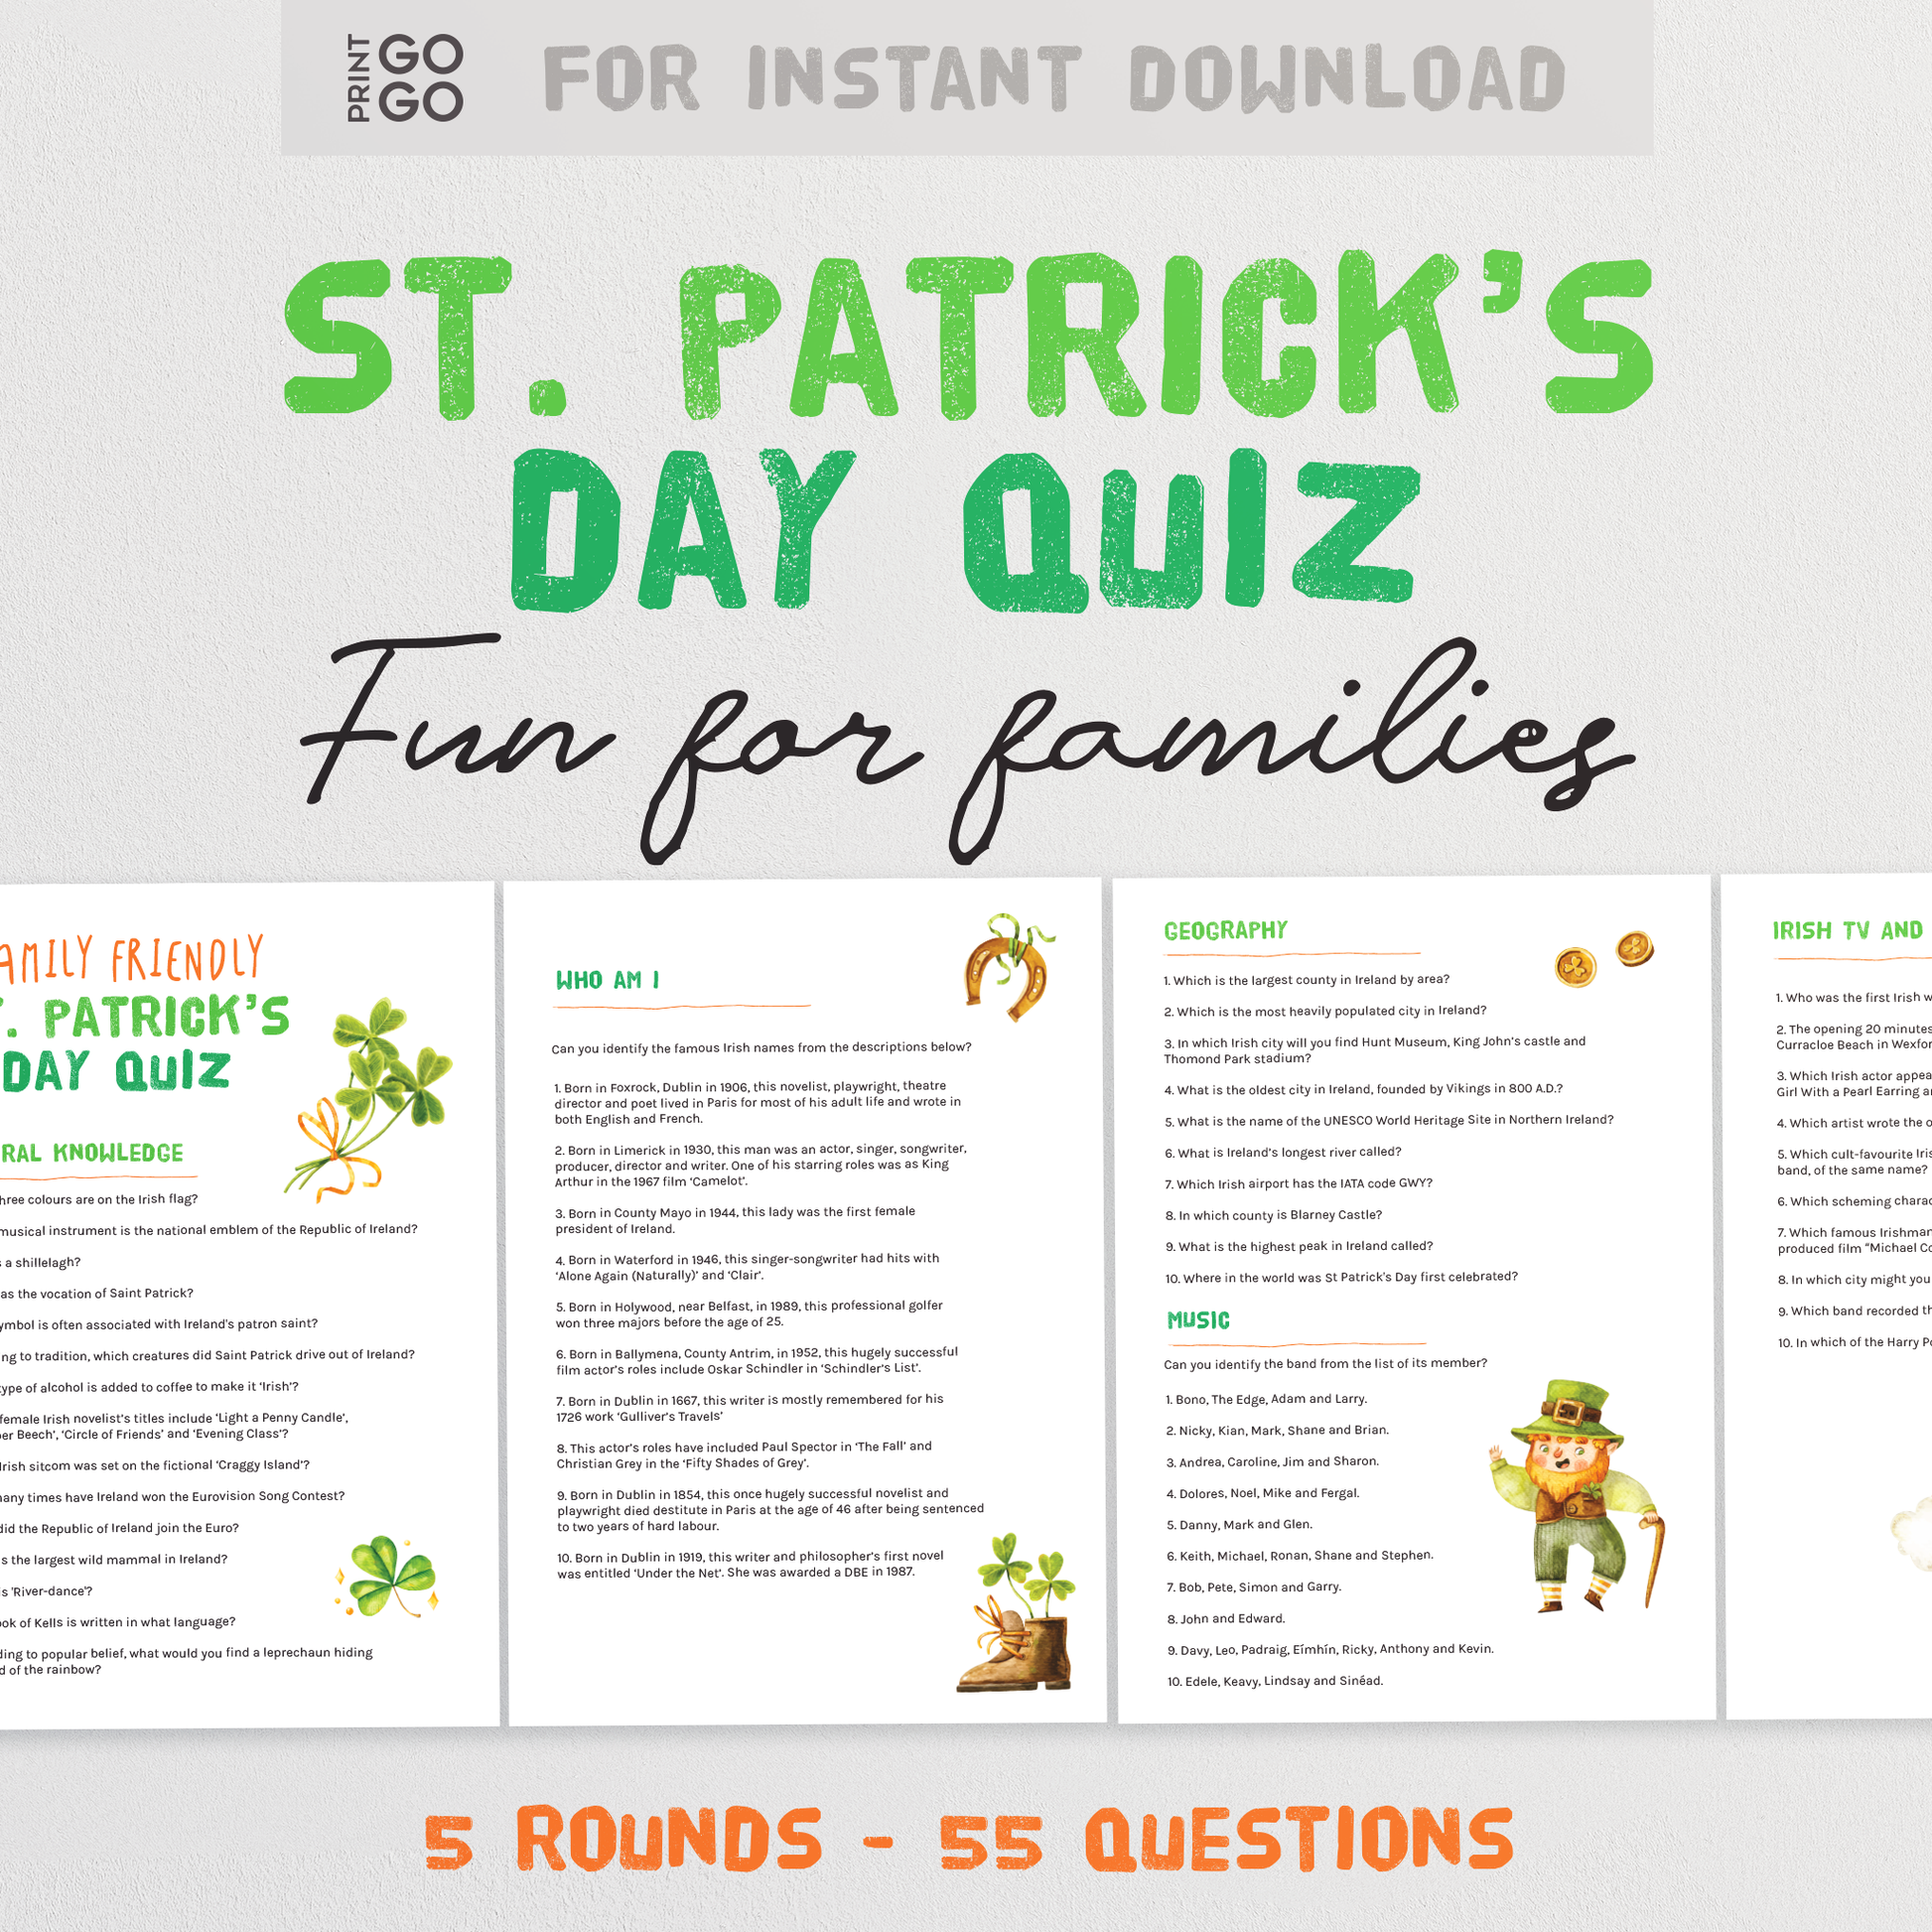 St. Patrick's Day Quiz - 55 Trivia Questions To Test Family and Friends